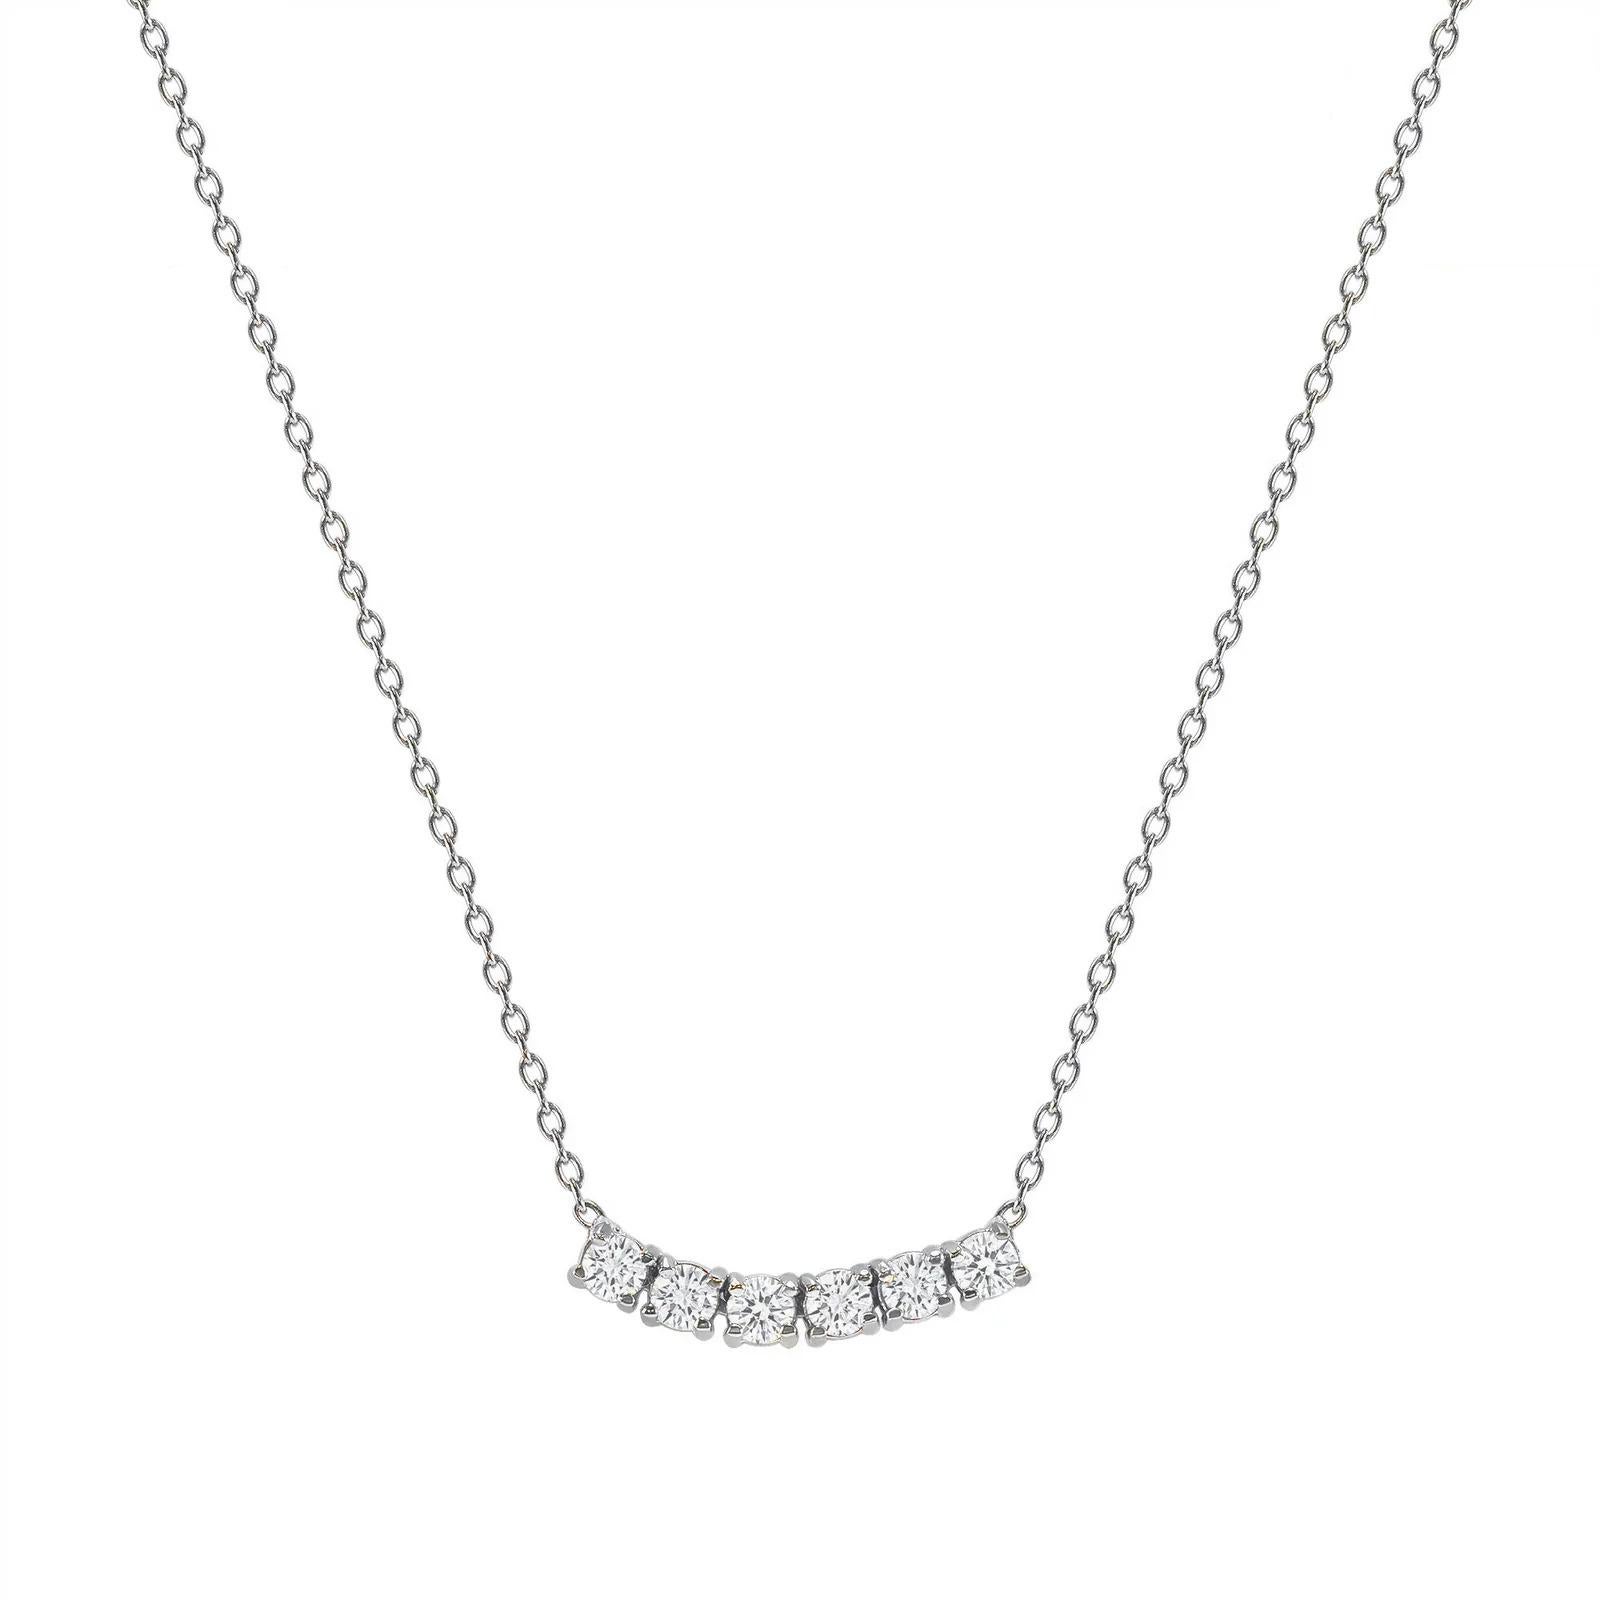 This petite, curved diamond necklace is crafted with gorgeous 14k gold set with six round diamonds.  

Gold: 14k 
Diamond Total Carats: 0.75ct
Diamond Cut: Round (6 diamonds)
Diamond Clarity: VS
Diamond Color: F
Color: White Gold
Necklace Length: 18